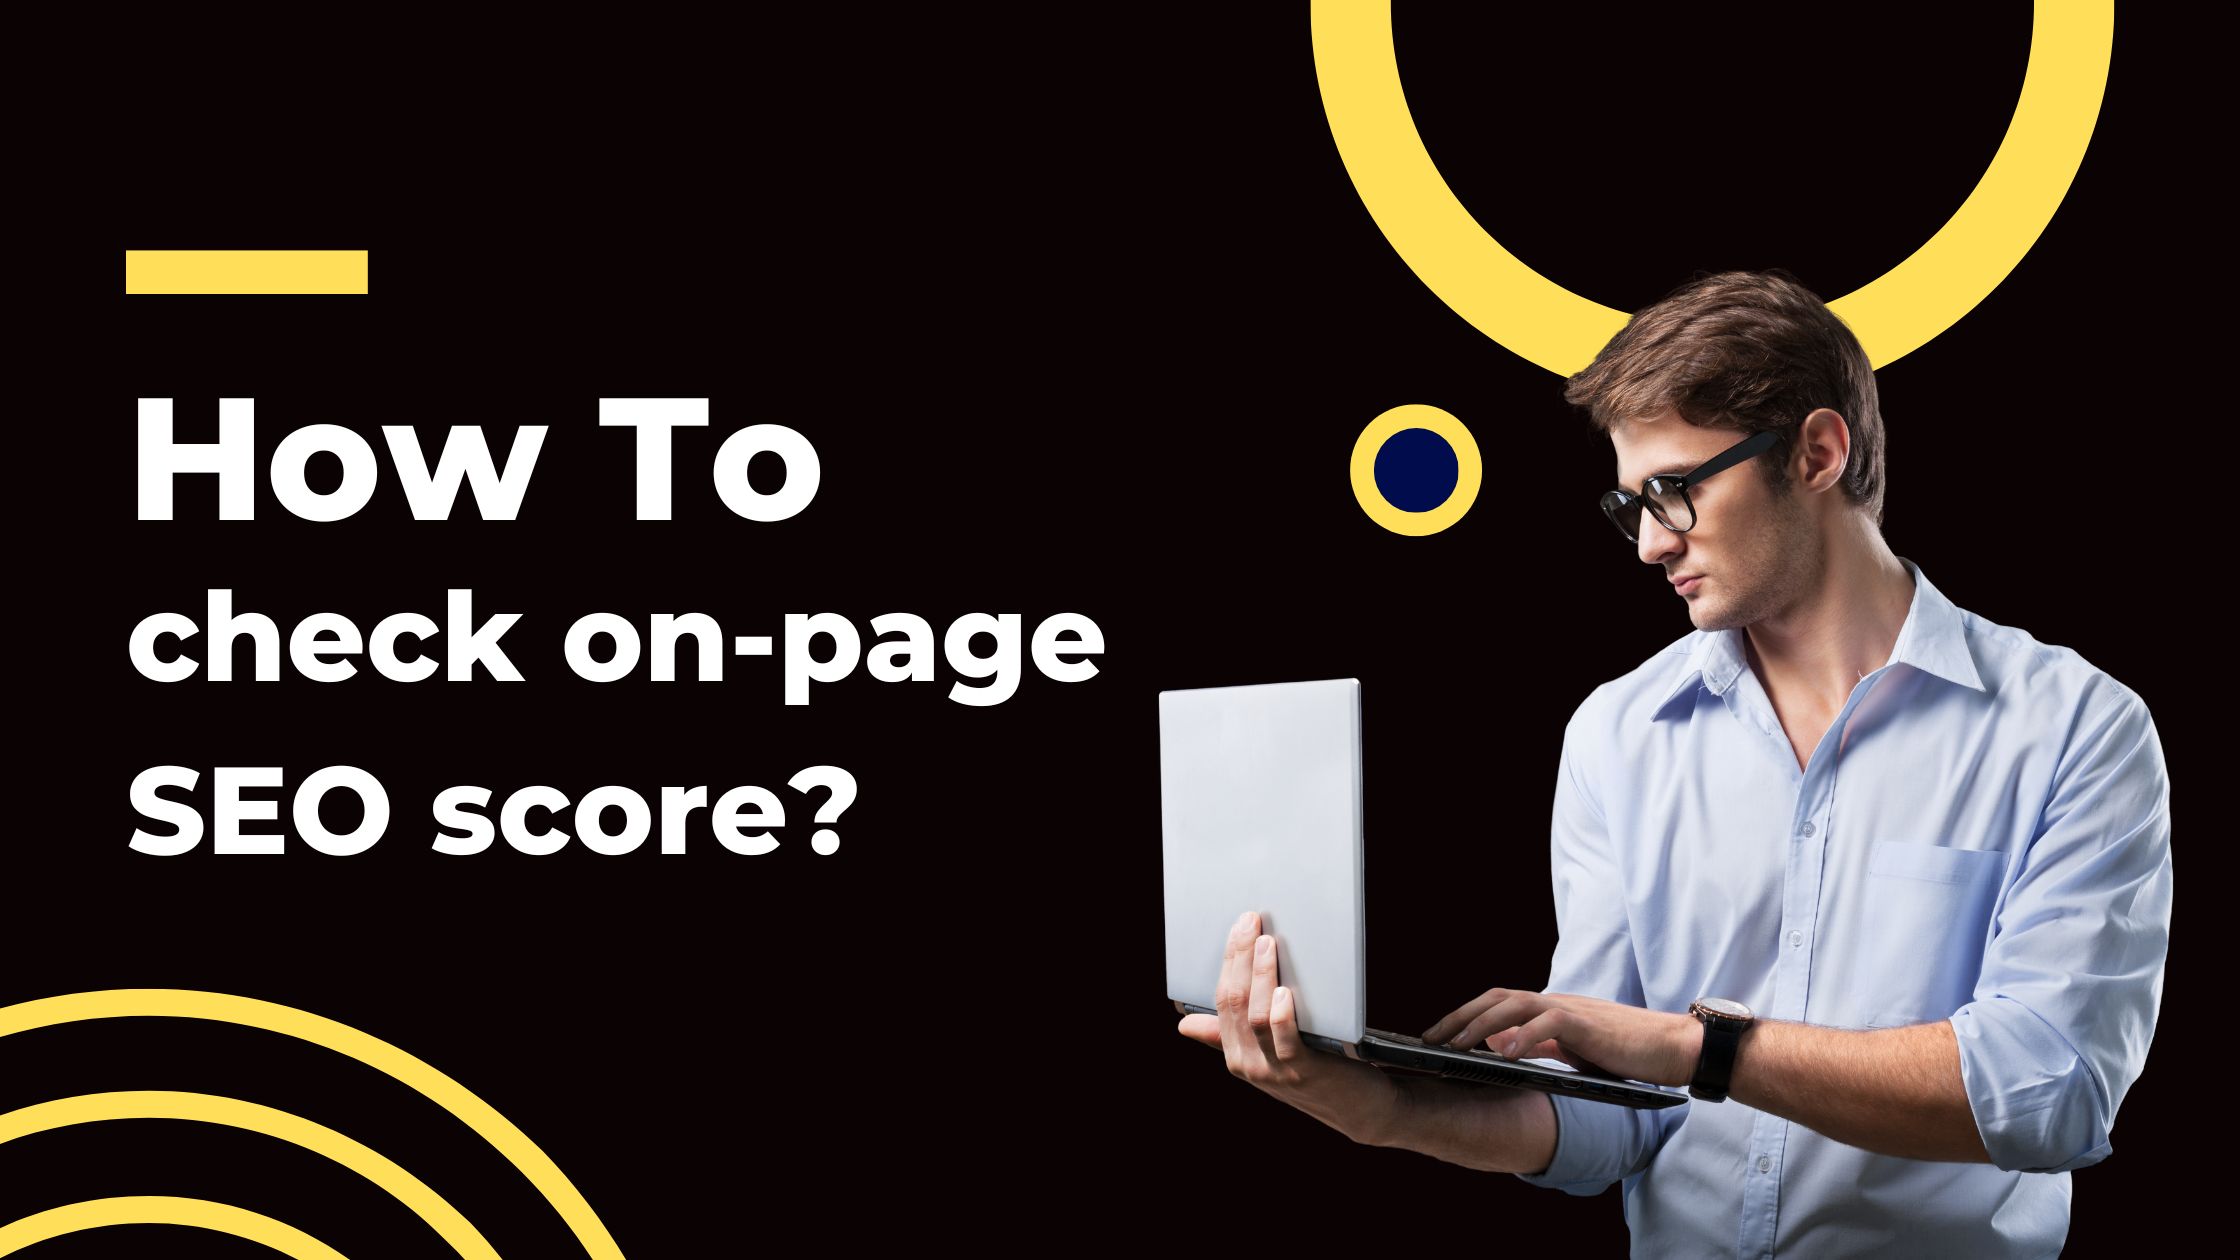 How to check on-page SEO score